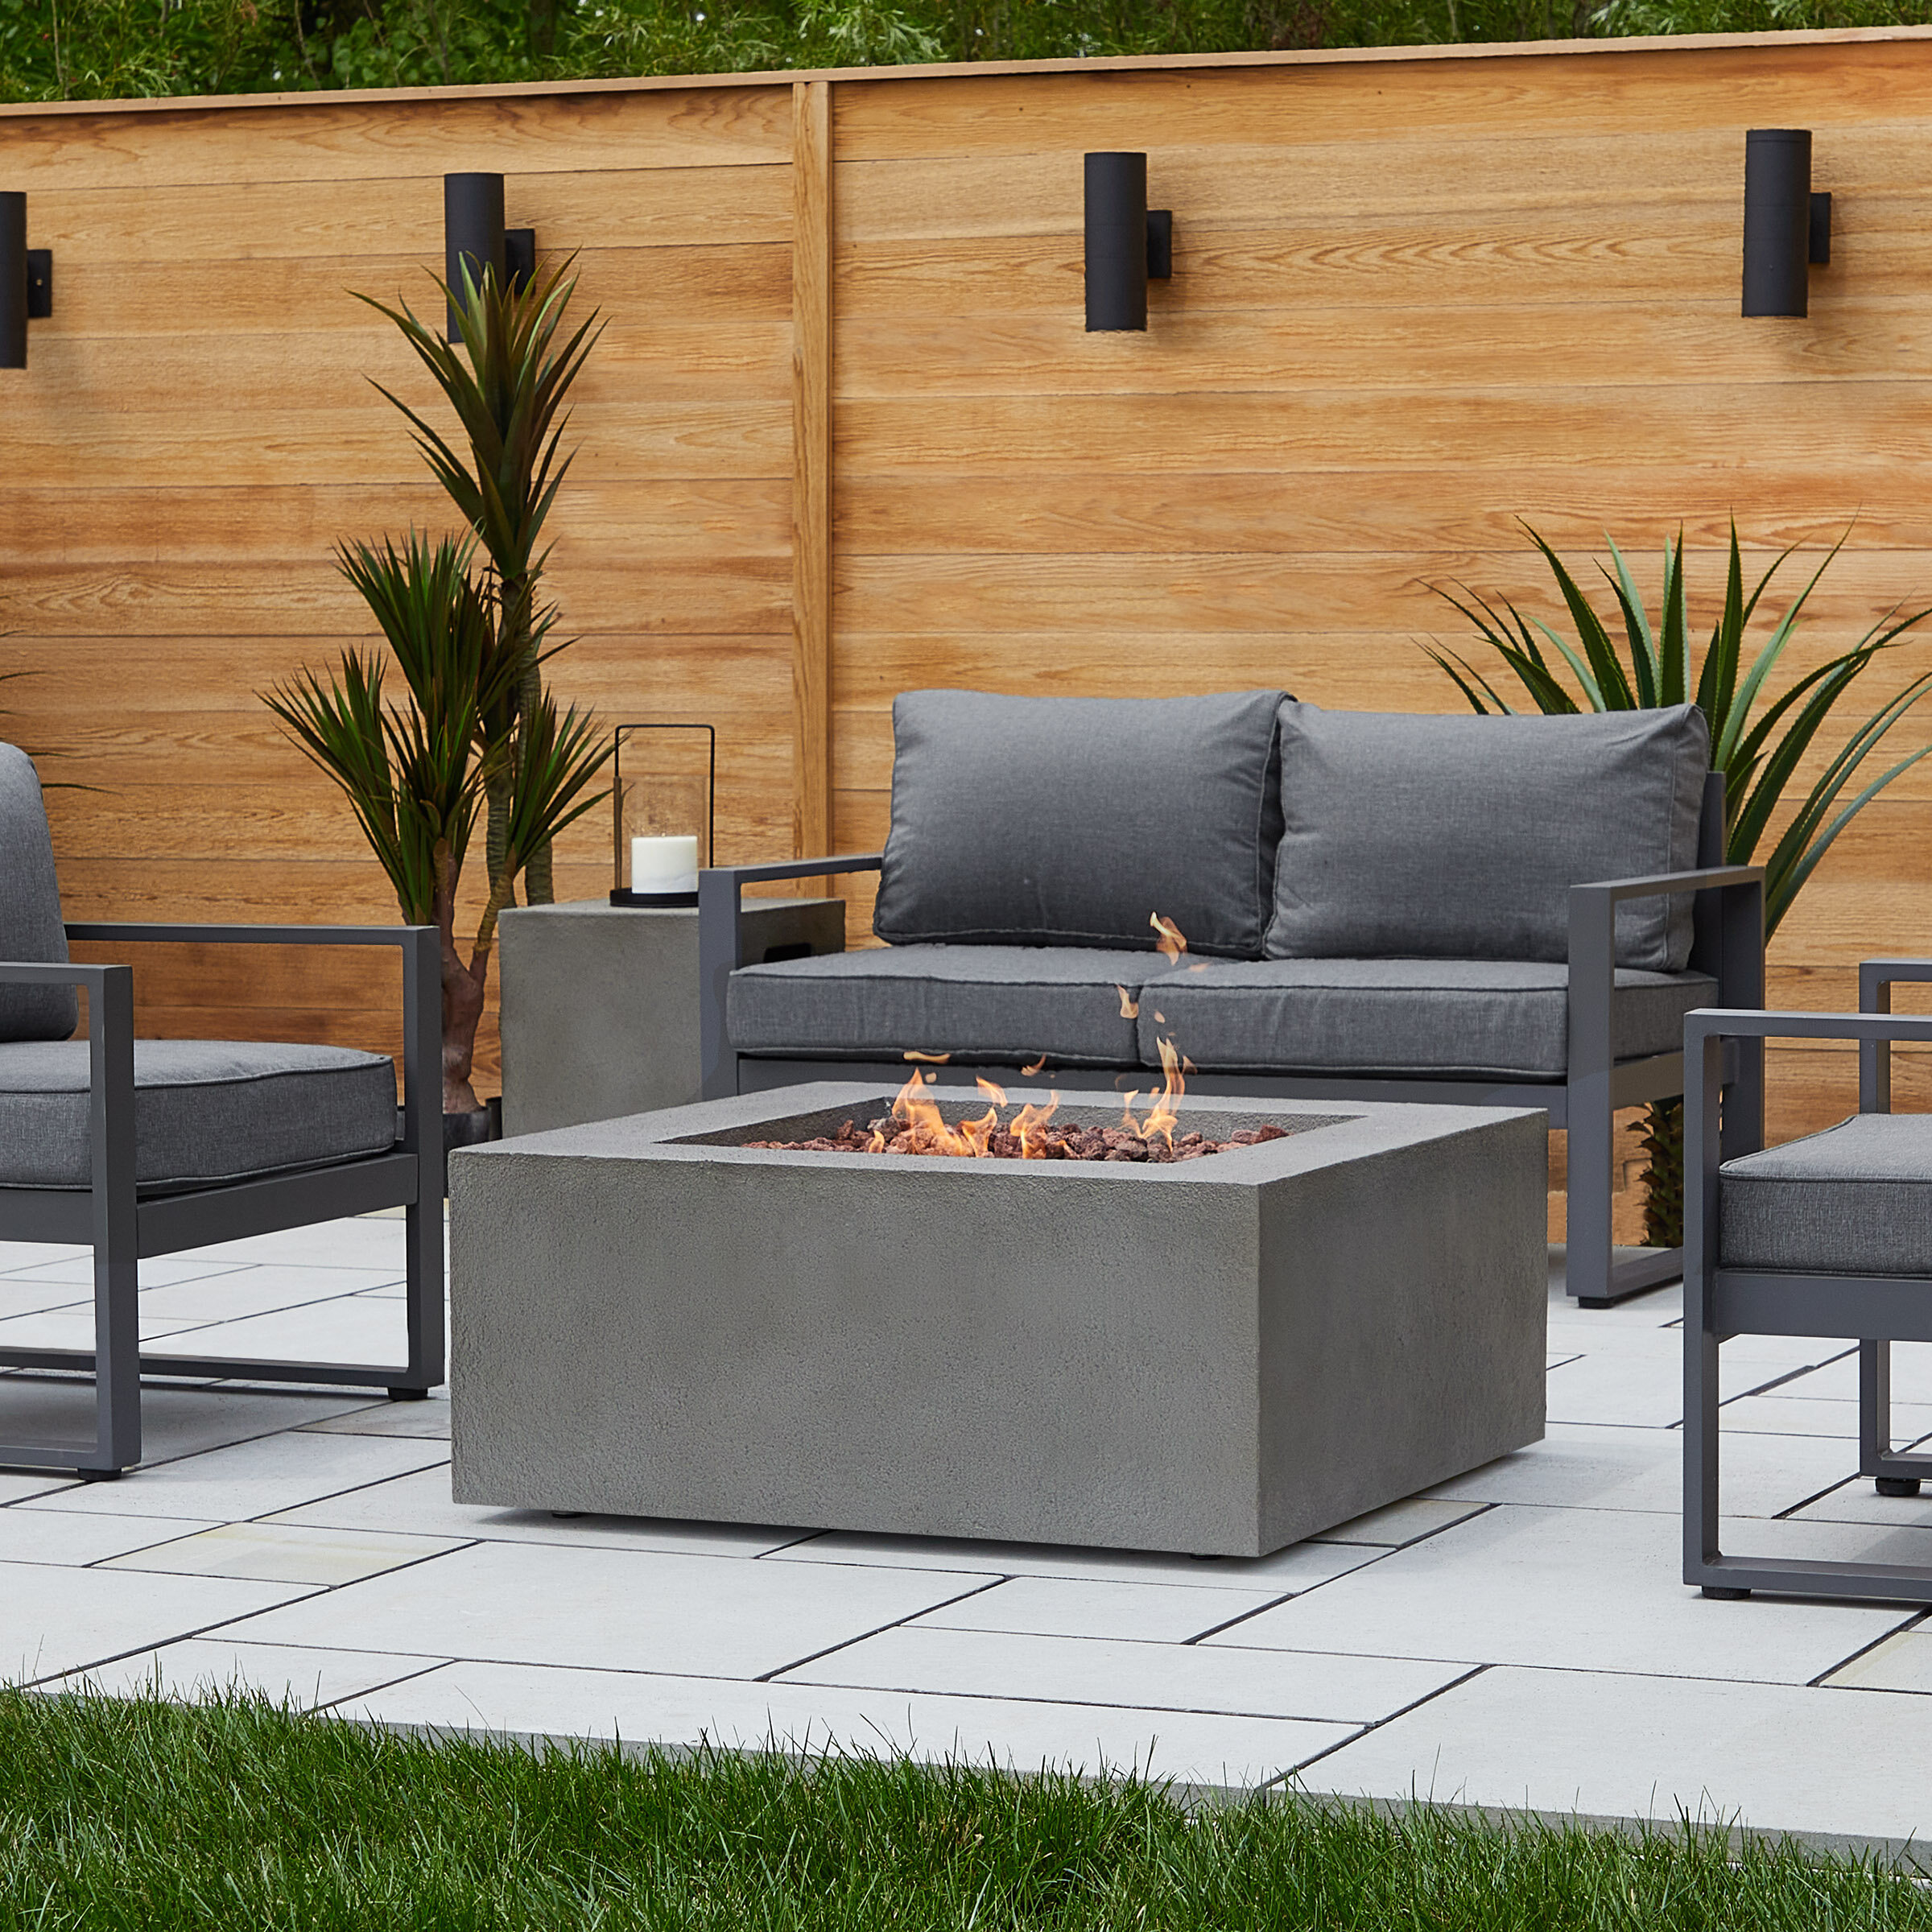 COSIEST 5-Piece Fire Pit Table Outdoor Furniture Warm Gray Wicker Conversation Set Fits 20lb Tank Outside w Glass Wind Guard 4 Coral Pillows w 32-inch Rectangle Wicker Fire Table 40,000BTU 